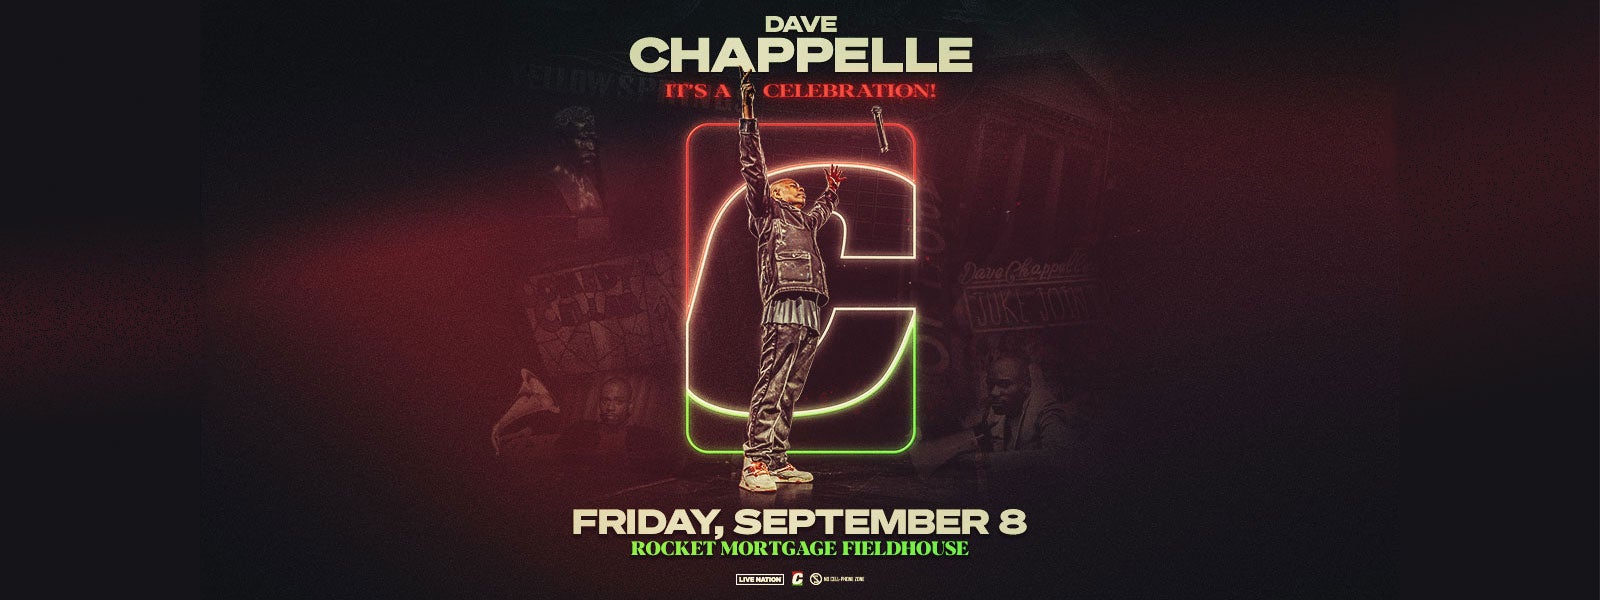 Dave Chappelle Live at Rocket Mortgage FieldHouse on Friday, September 8th